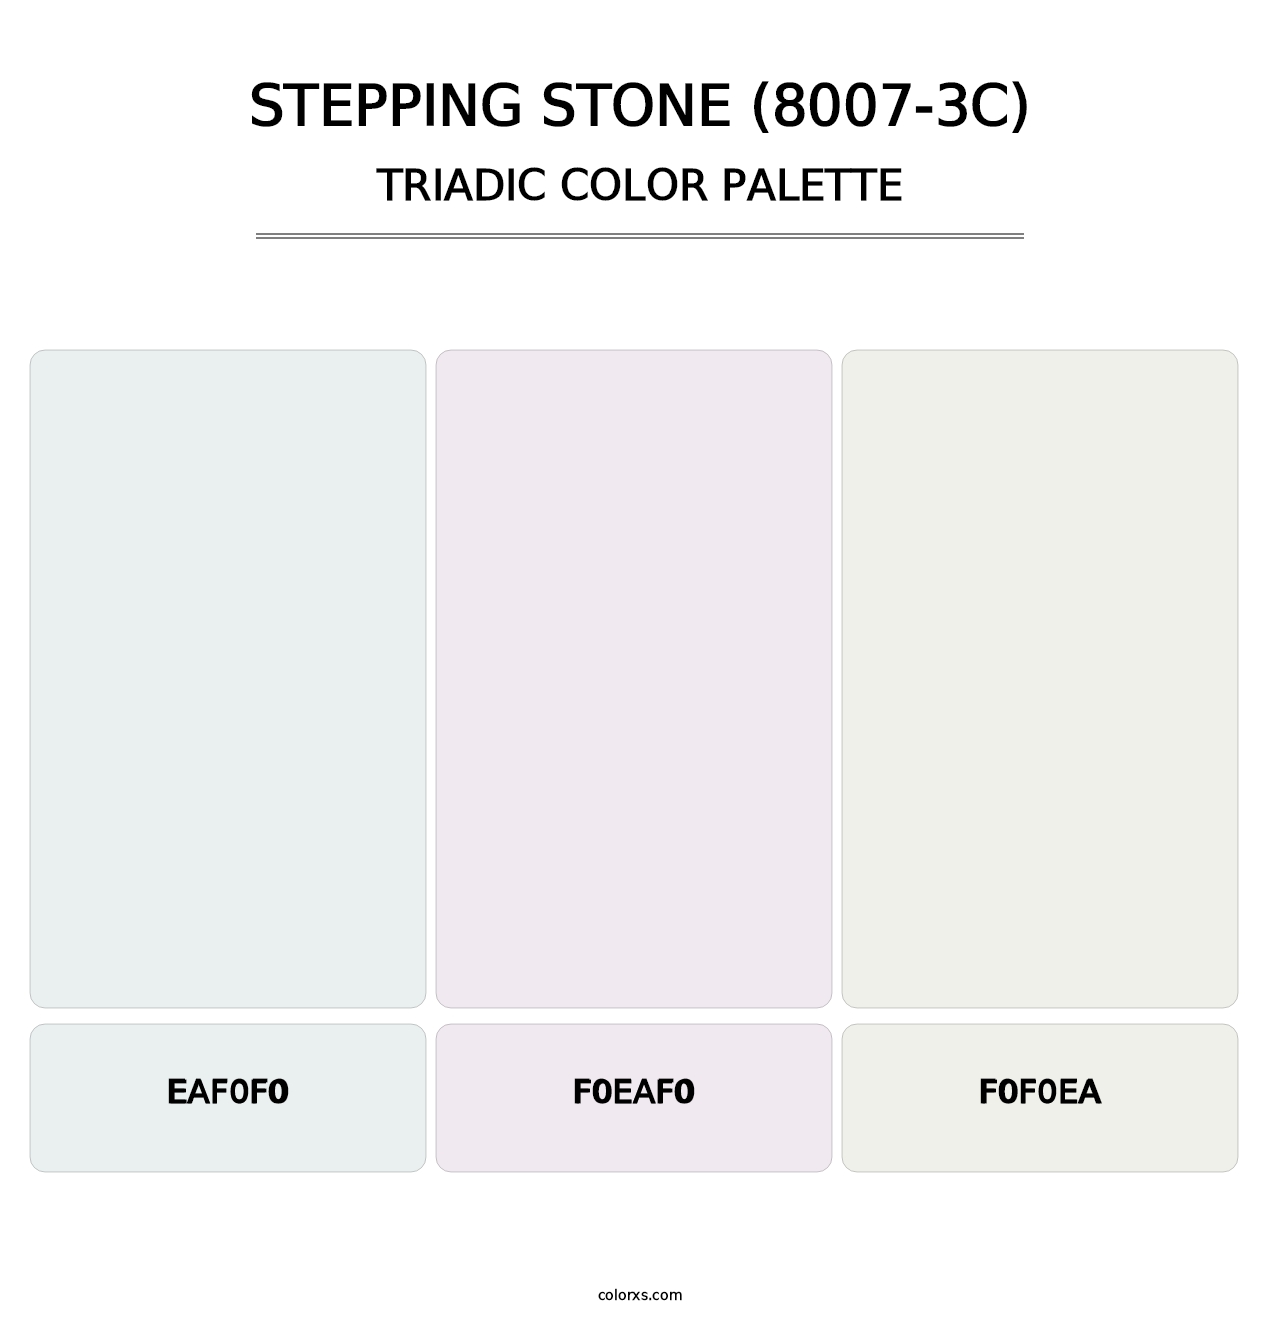 Stepping Stone (8007-3C) - Triadic Color Palette